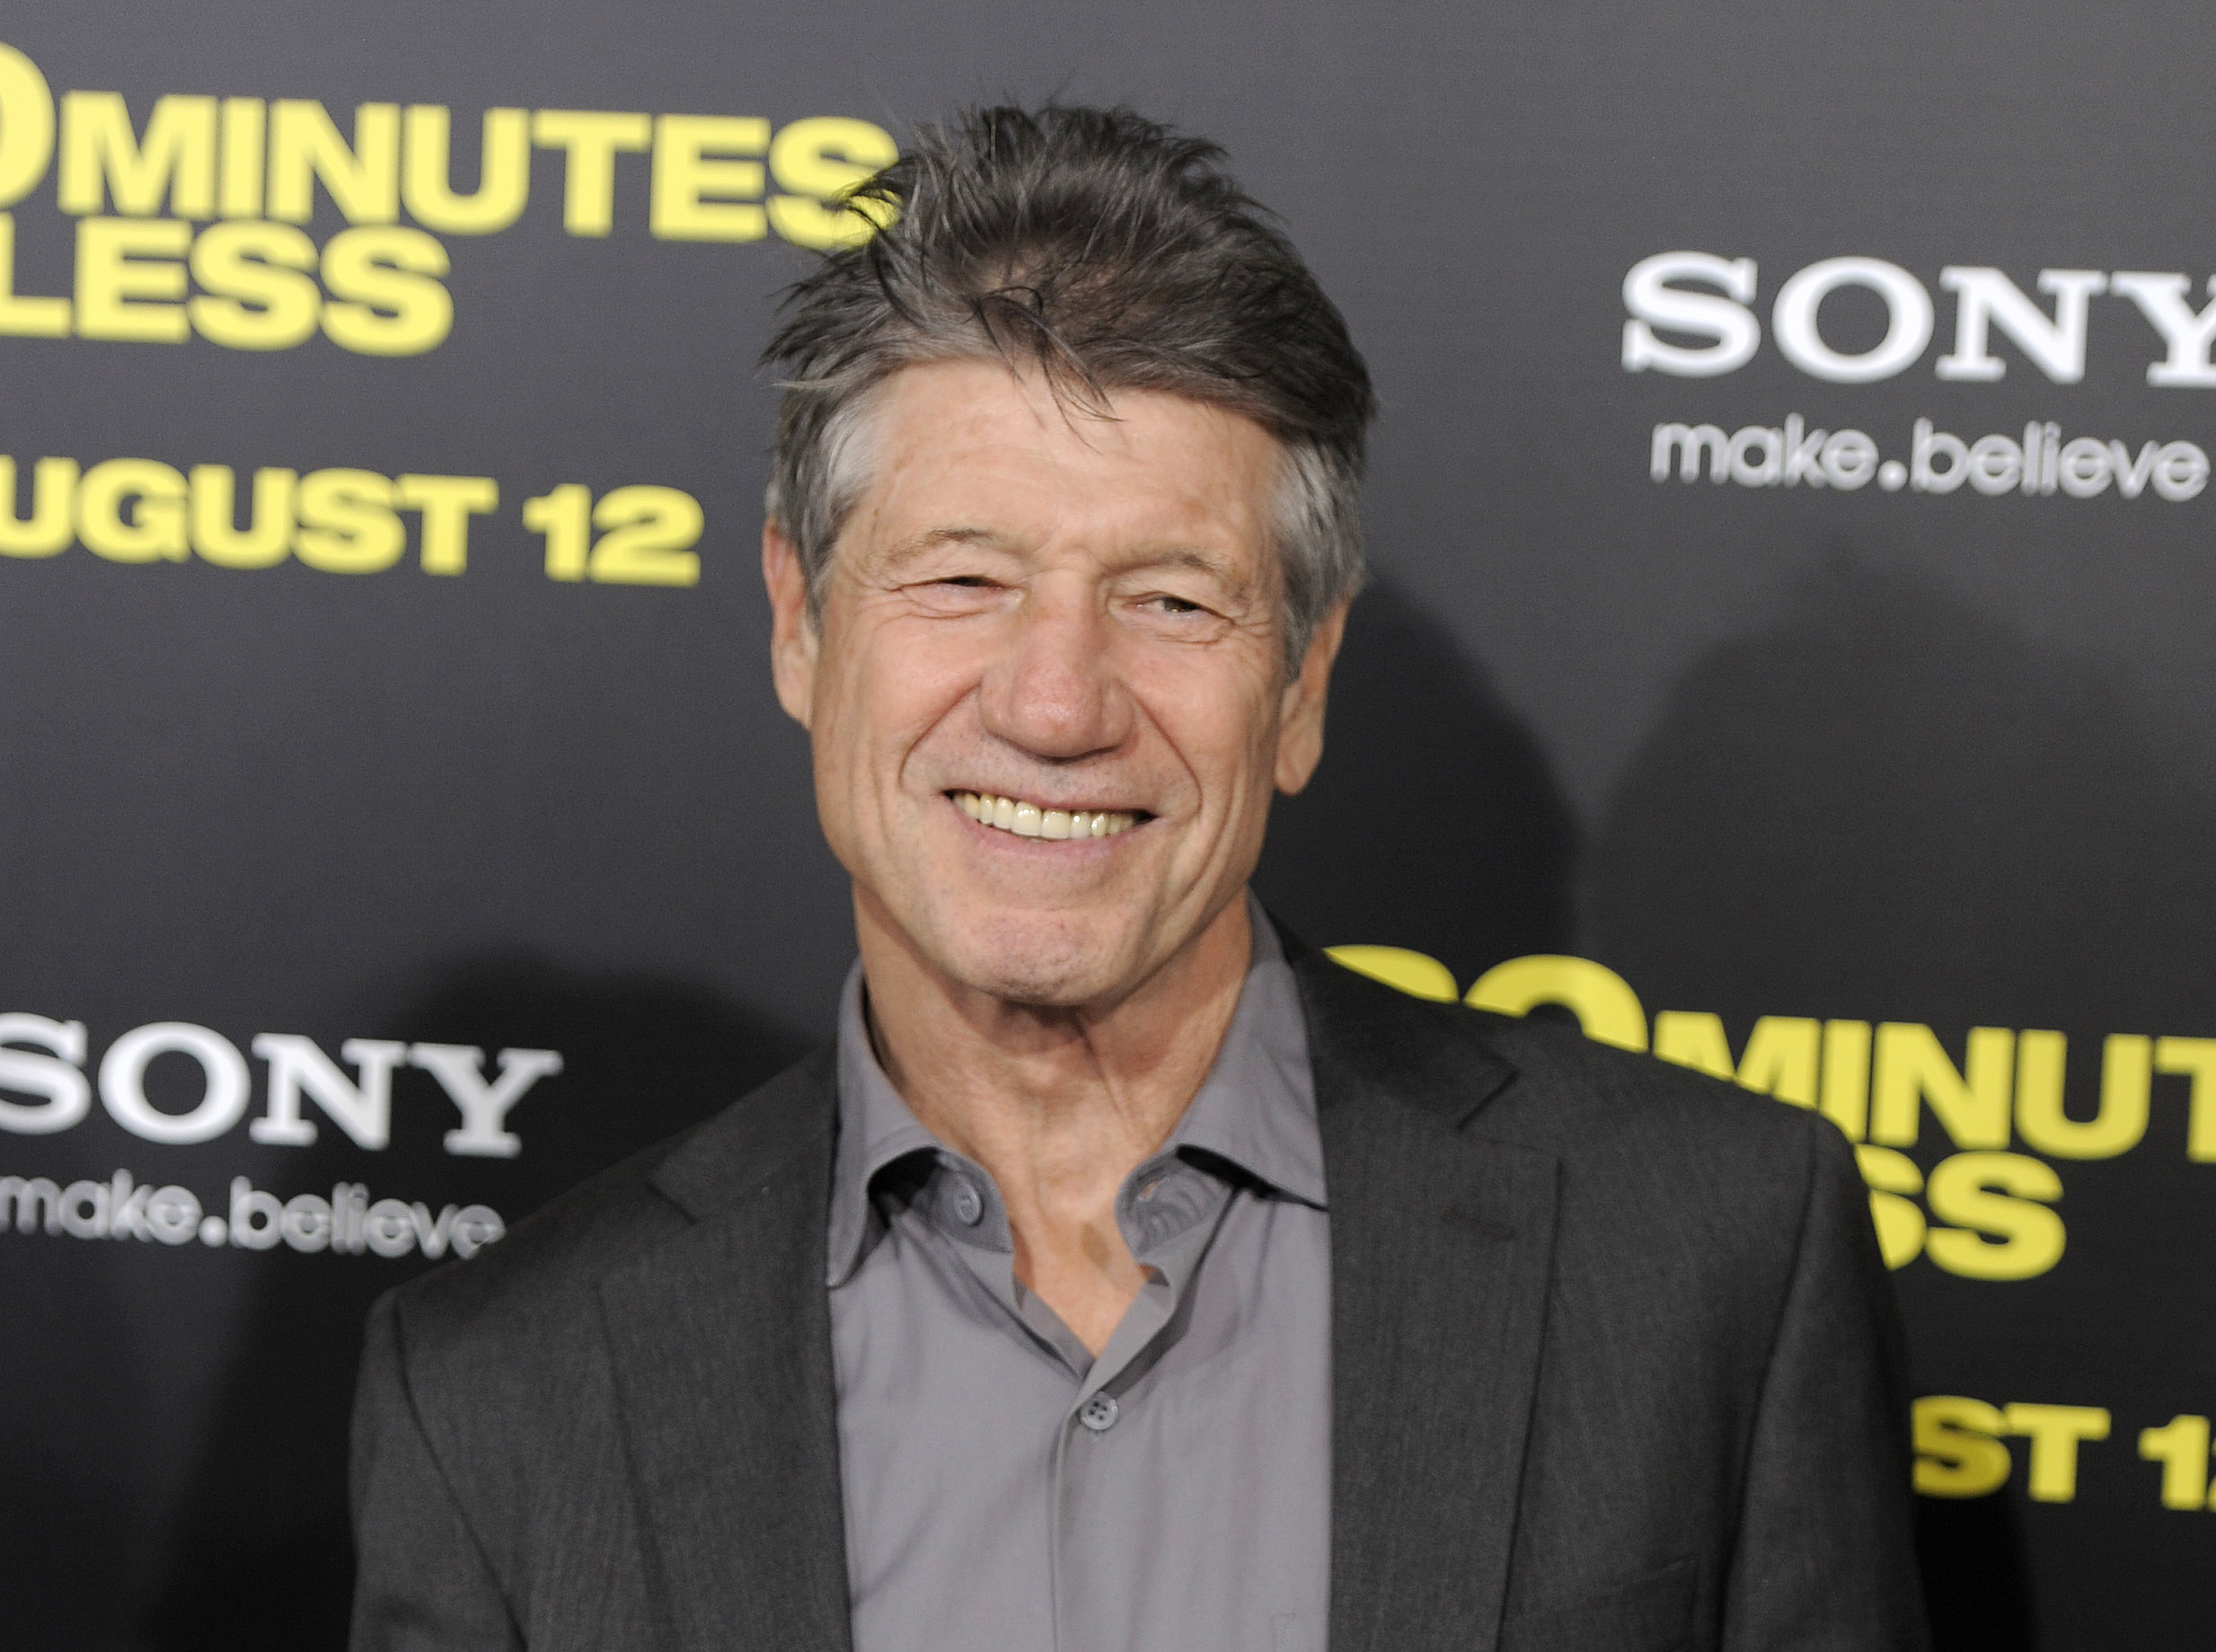 FILE - Fred Ward, a cast member in "30 Minutes or Less," poses at the premiere of the film in Los Angeles on Aug. 8, 2011. Ward, a veteran actor who brought a gruff tenderness to tough-guy roles in such films as “The Right Stuff,” “The Player” and “Tremors,” died Sunday, May 8, his publicist Ron Hofmann said Friday, May 13, 2022. He was 79. (AP Photo/Chris Pizzello, File)